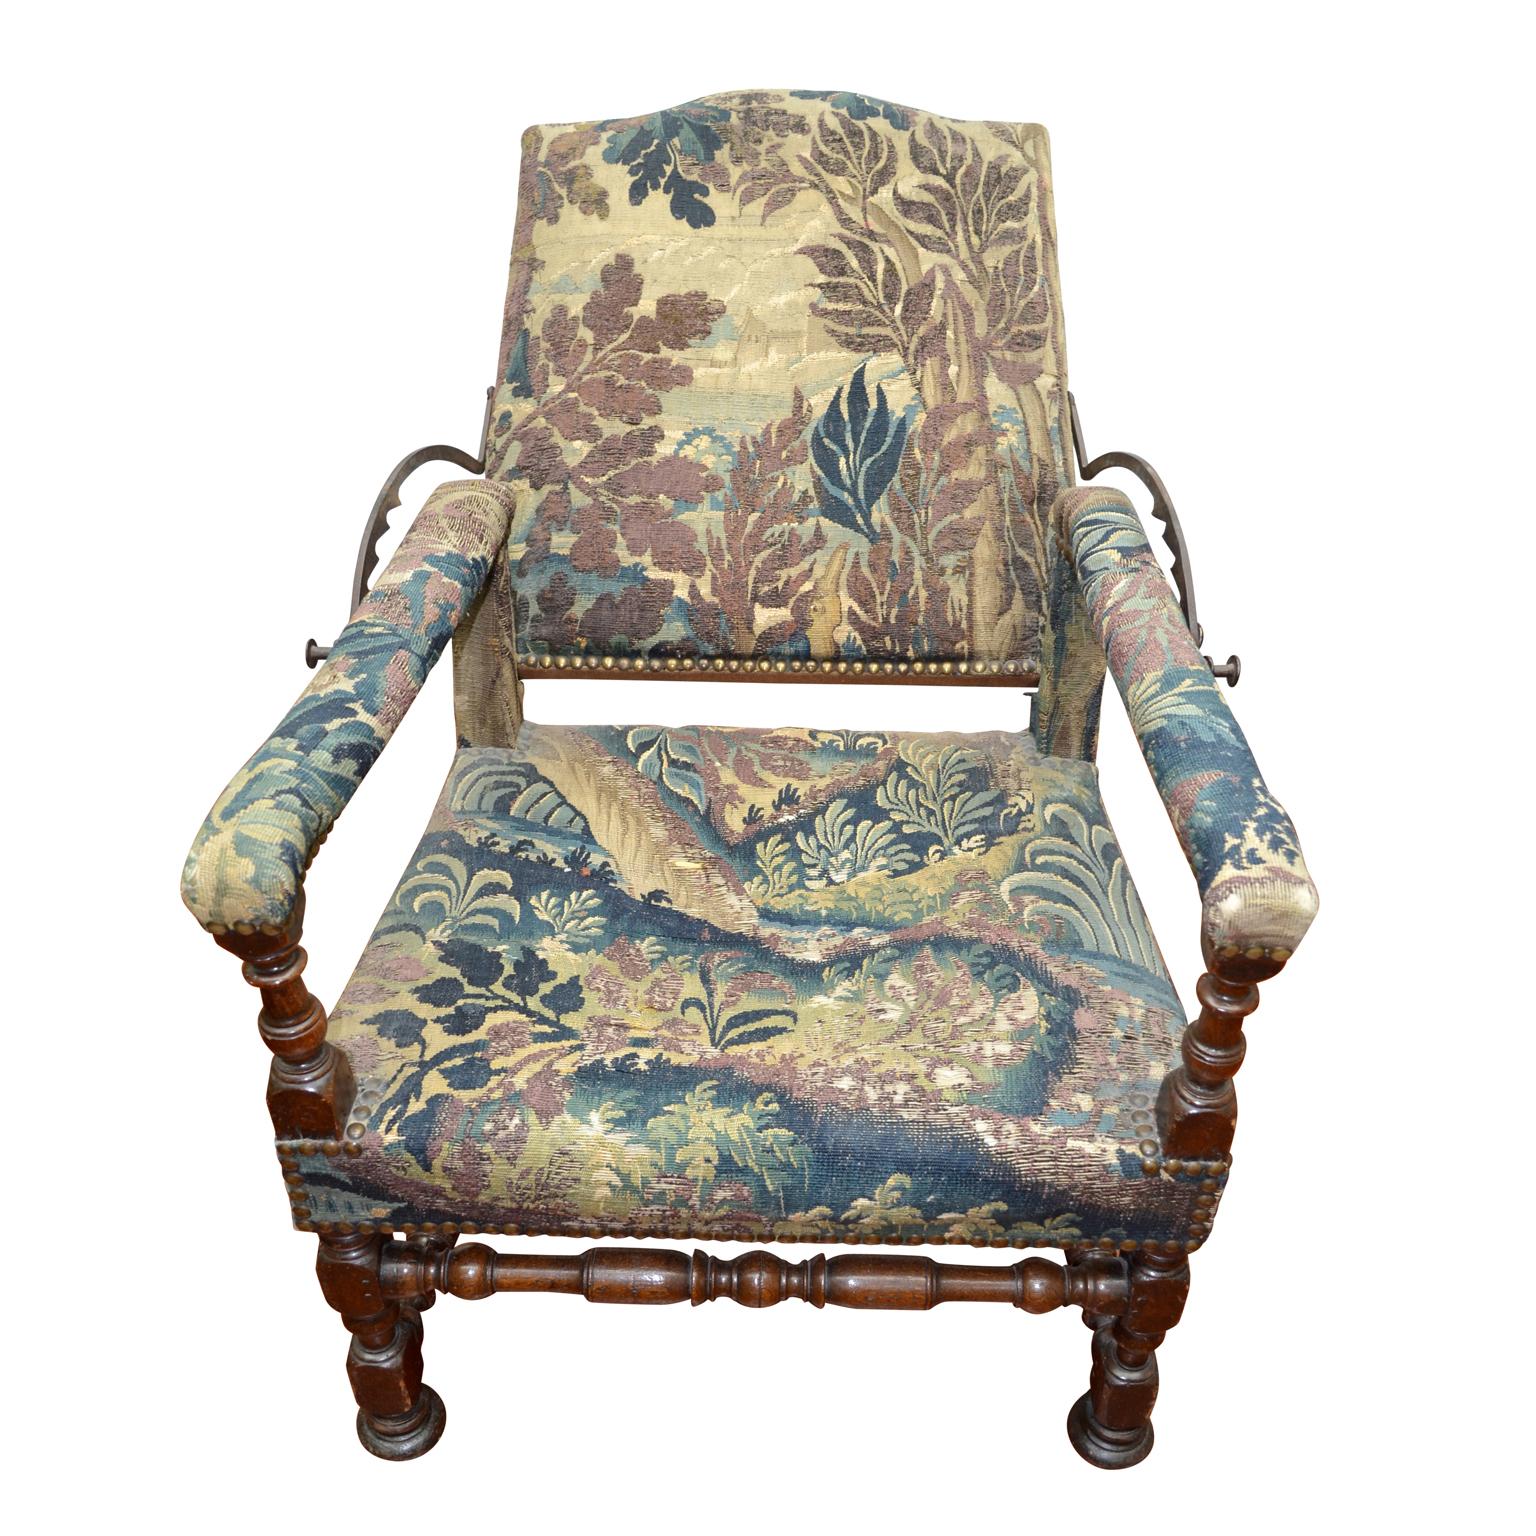 Hand-Carved French Tapestry Reclining Armchair, a Veritable Medieval La-Z-boy For Sale